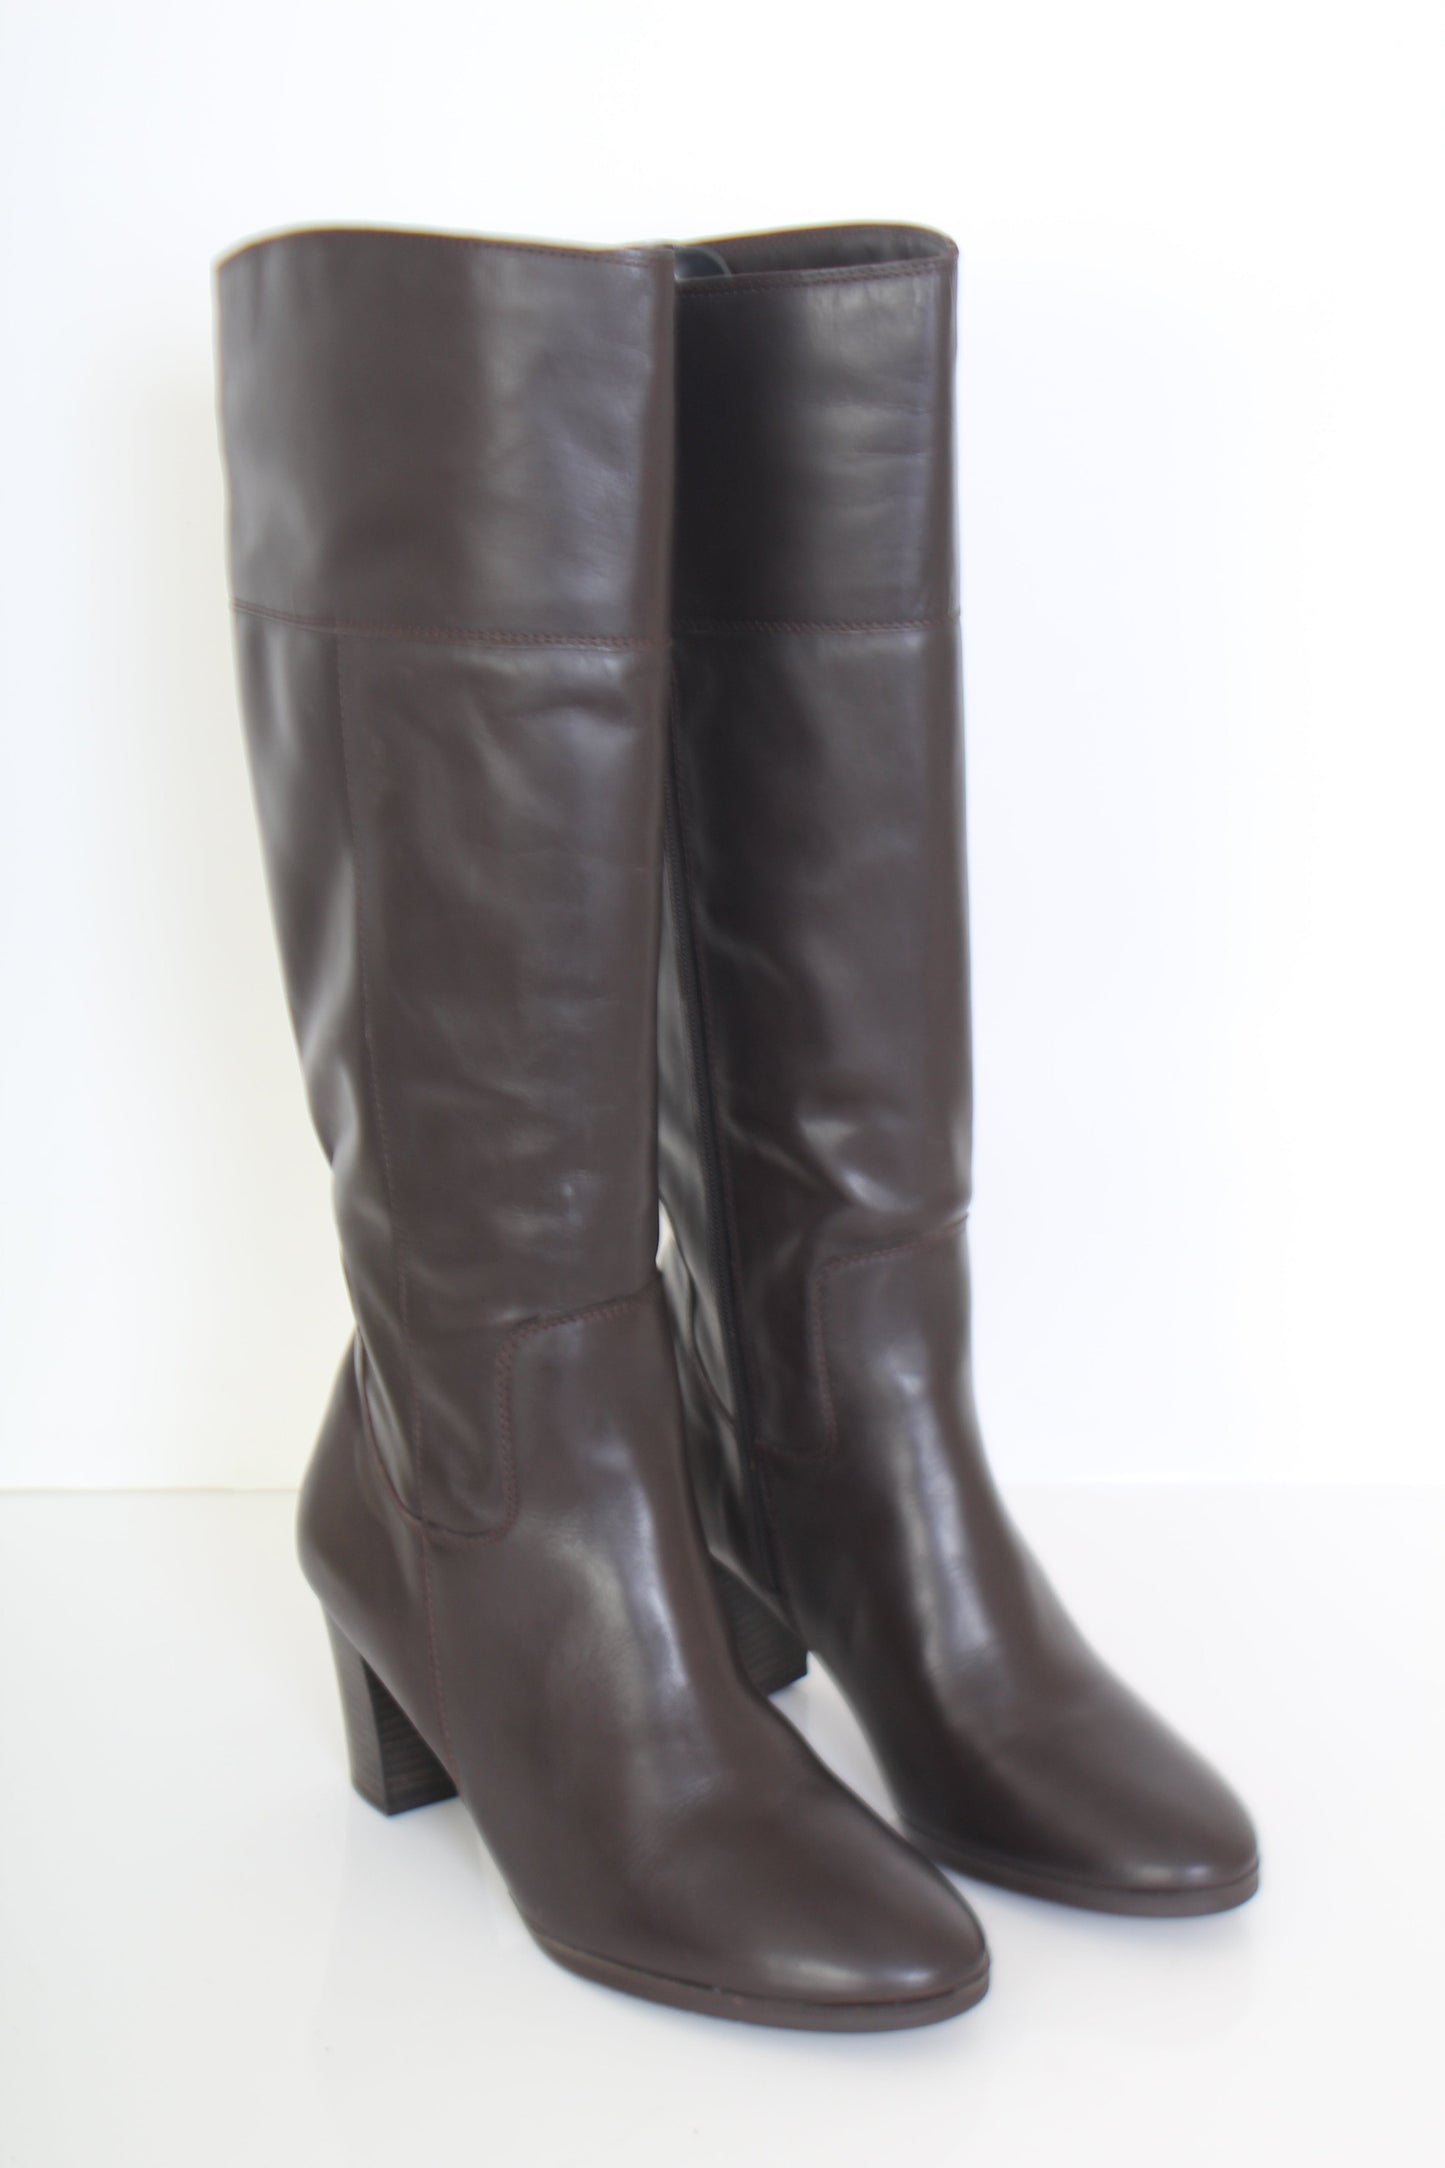 Brown knee high boots for women